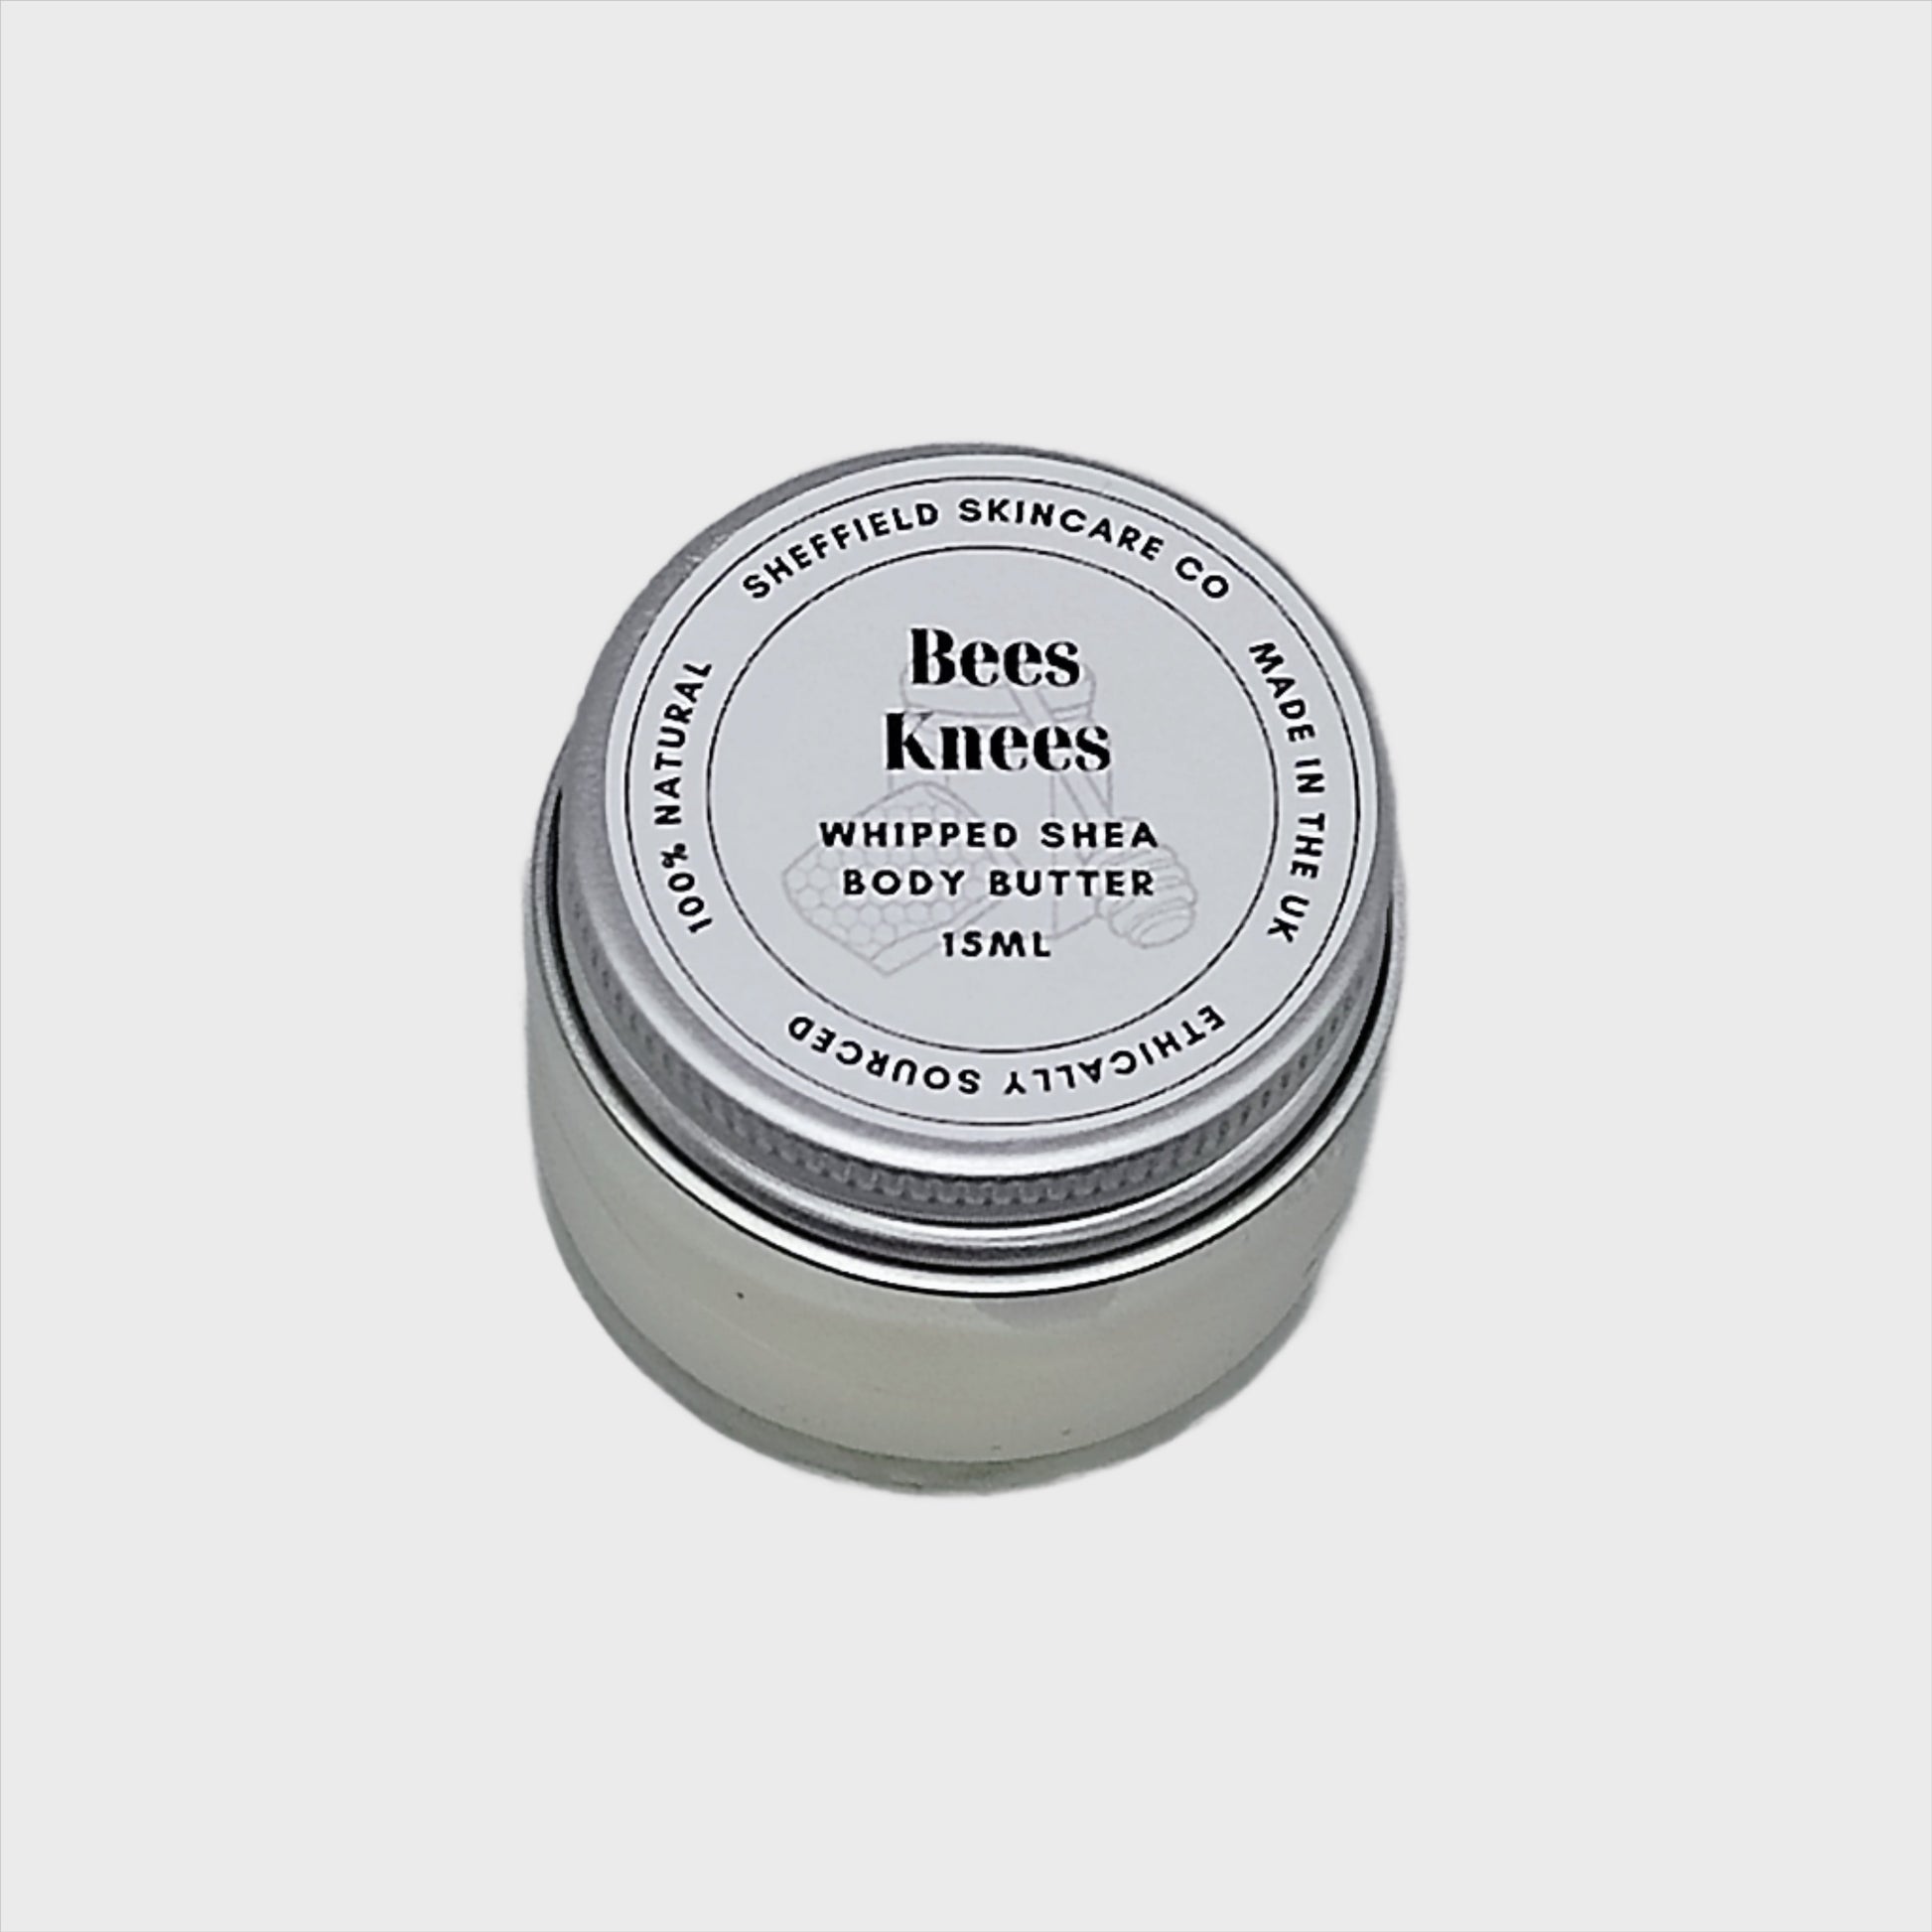 15 Bees Knees Body Butter 